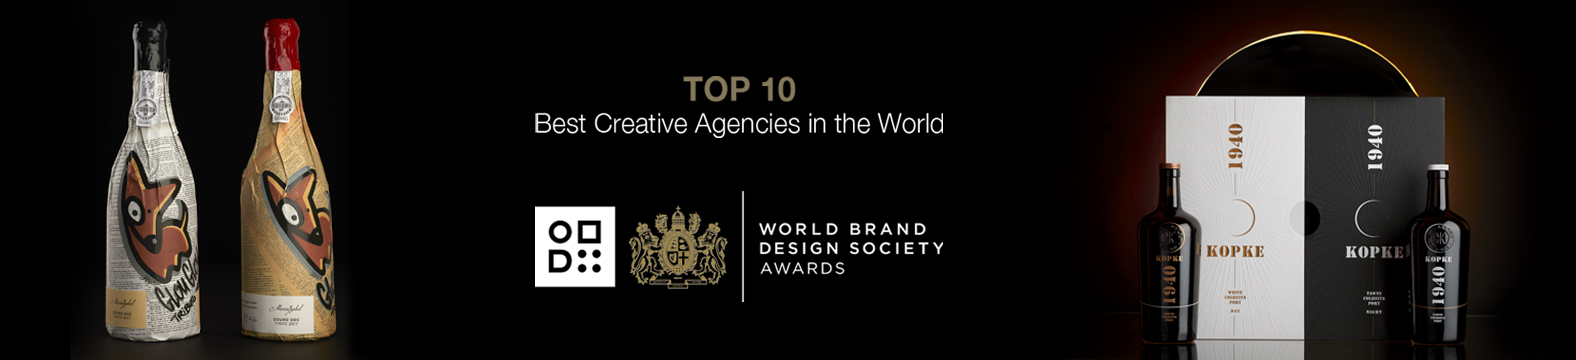 Omdesign is in the Top10 of the best creative agencies